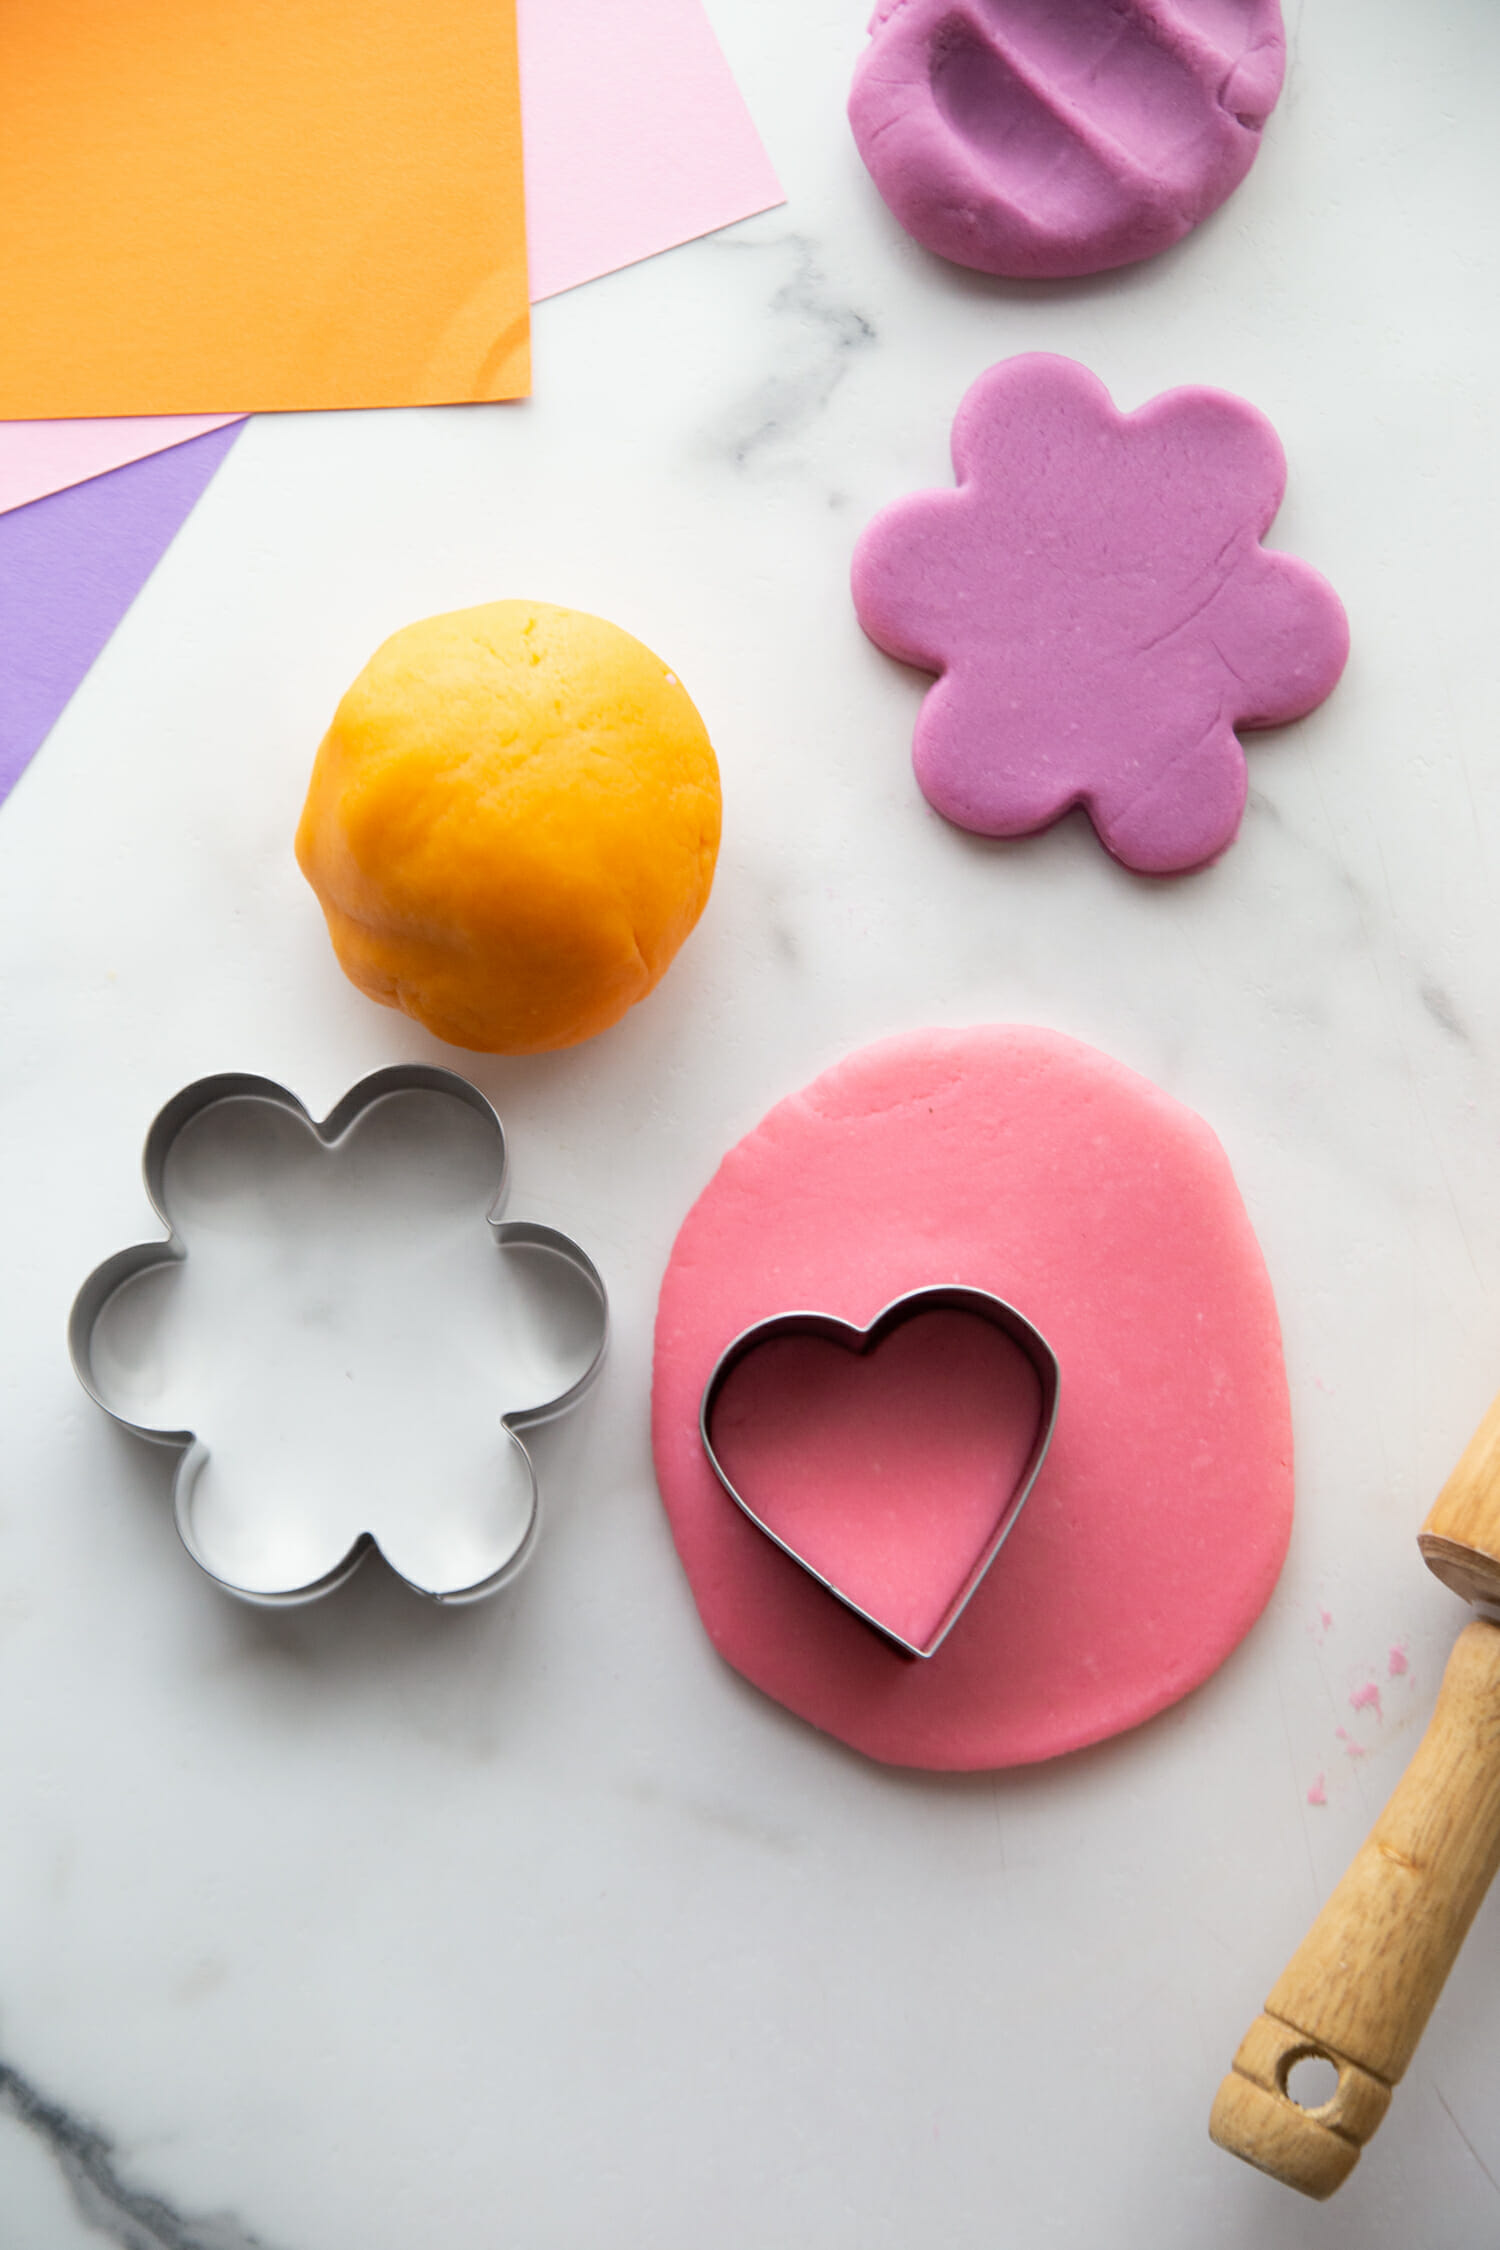 Orange playdough ball next to a purple playdough flower, and pink playdough flatended out with a heart shapped coookie cutter on top.